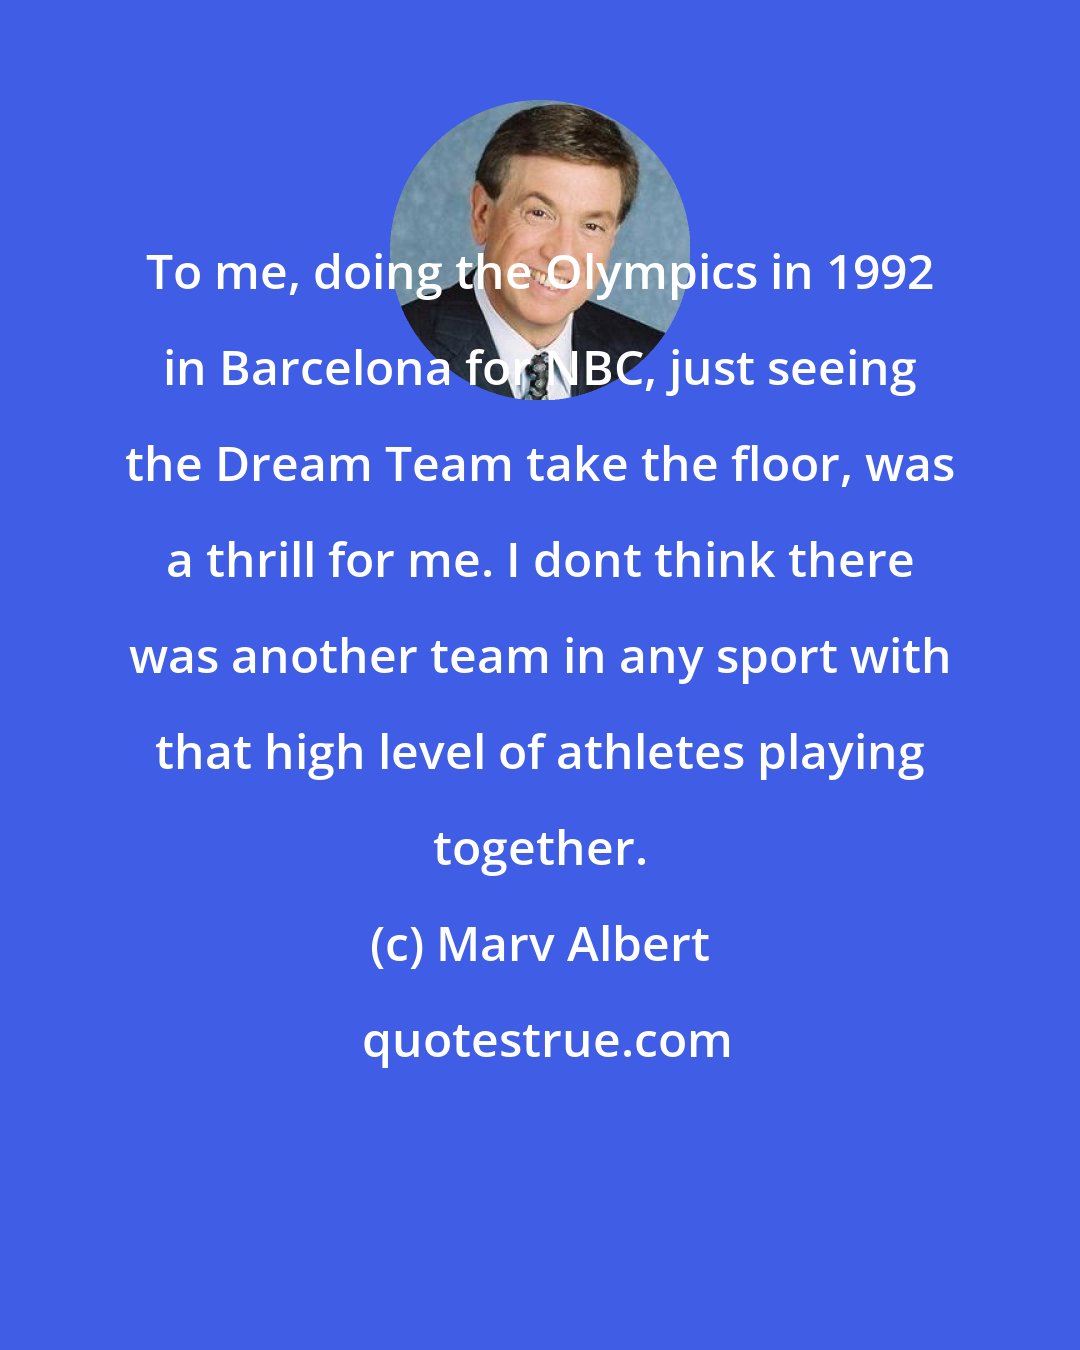 Marv Albert: To me, doing the Olympics in 1992 in Barcelona for NBC, just seeing the Dream Team take the floor, was a thrill for me. I dont think there was another team in any sport with that high level of athletes playing together.